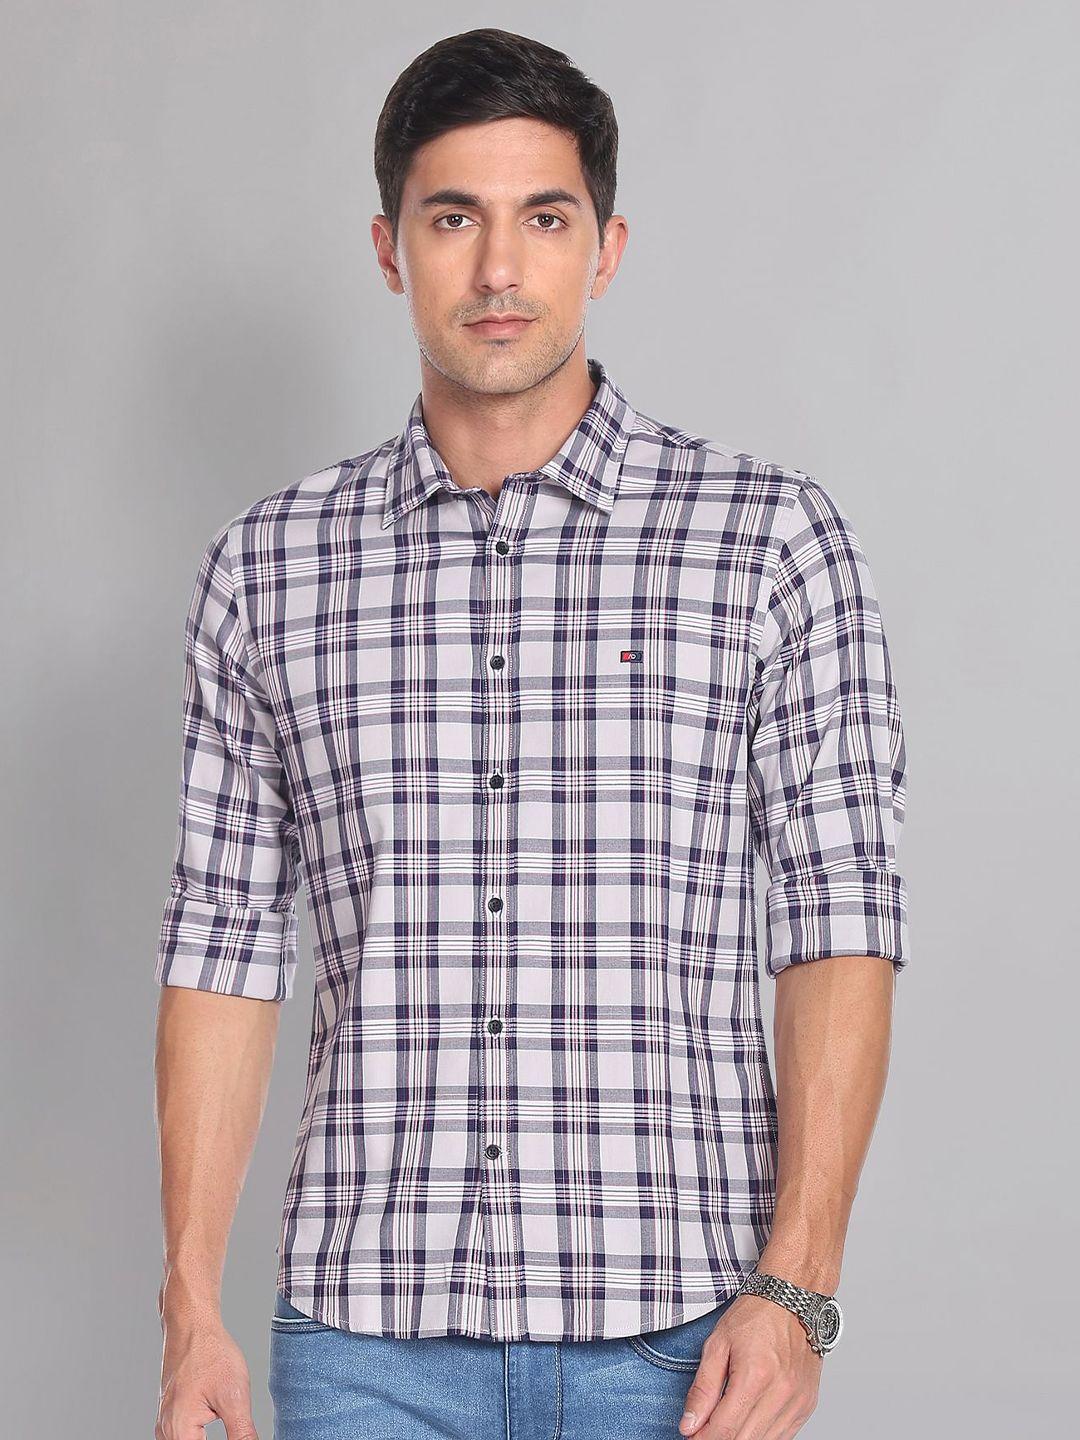 ad by arvind checked pure cotton slim fit casual shirt